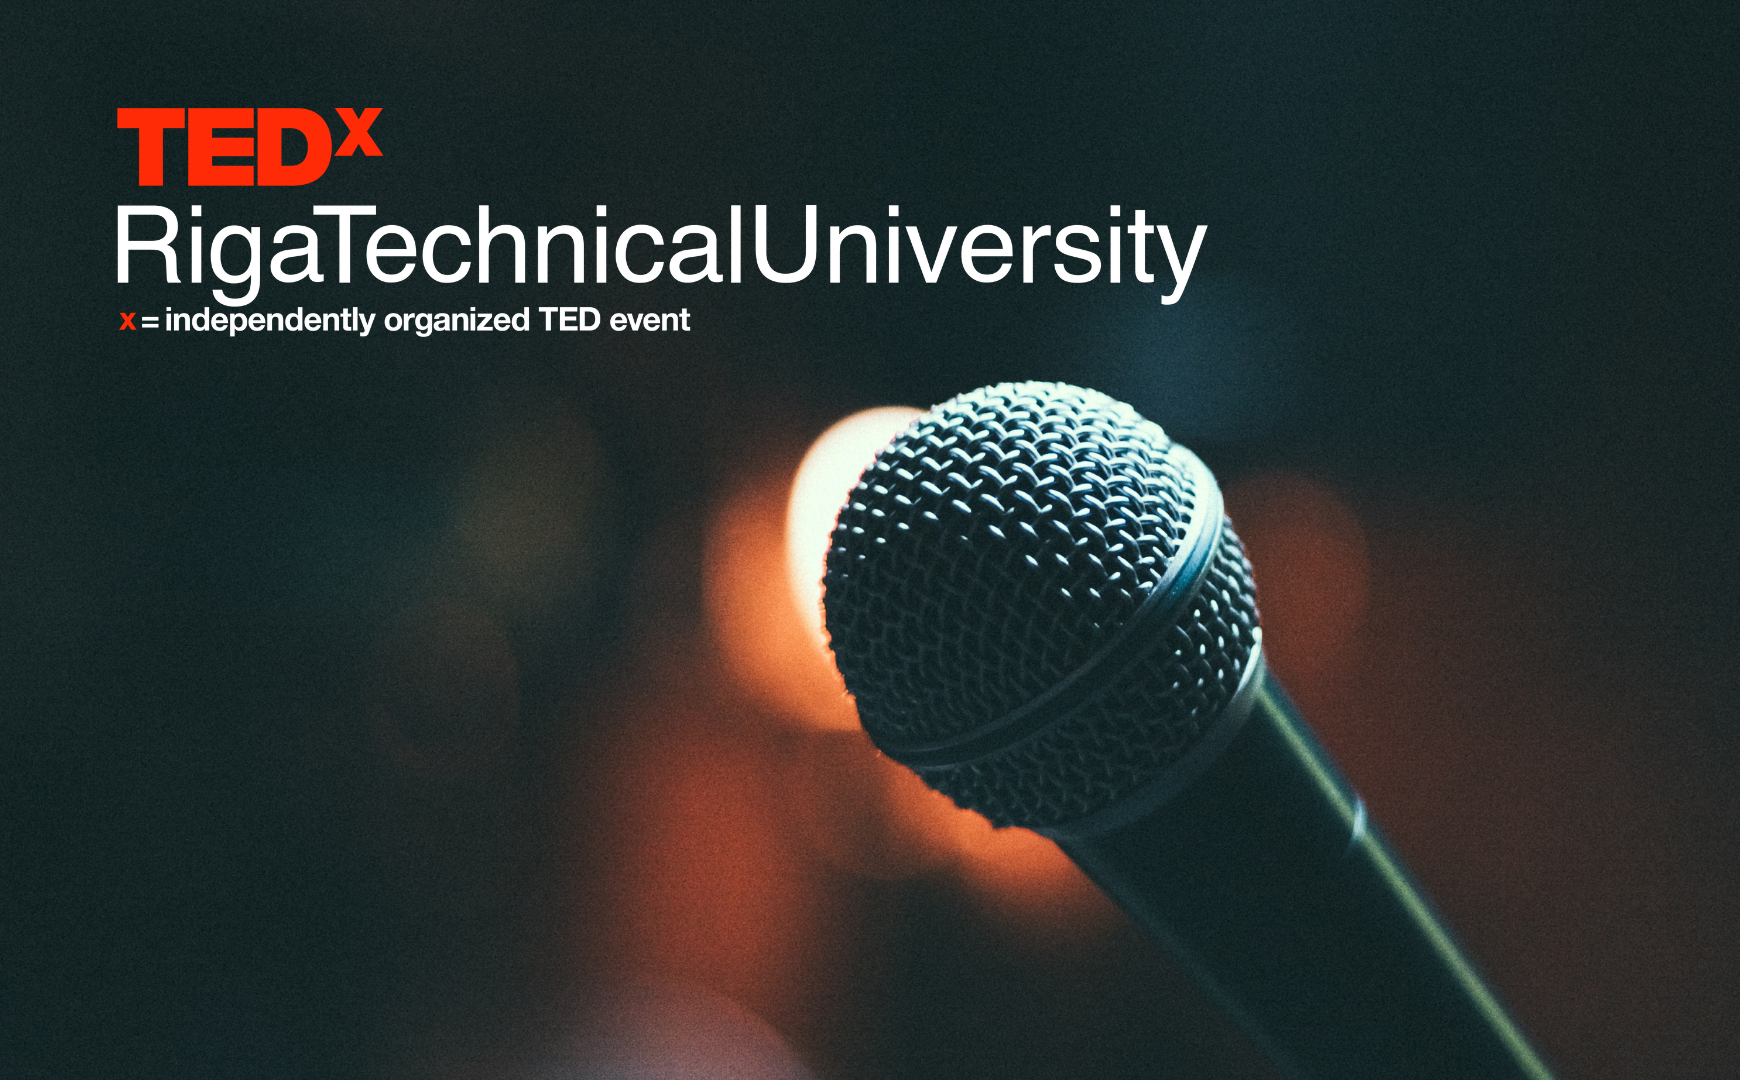 RTU WILL BE THE FIRST UNIVERSITY IN LATVIA TO ORGANIZE A TEDX CONFERENCE